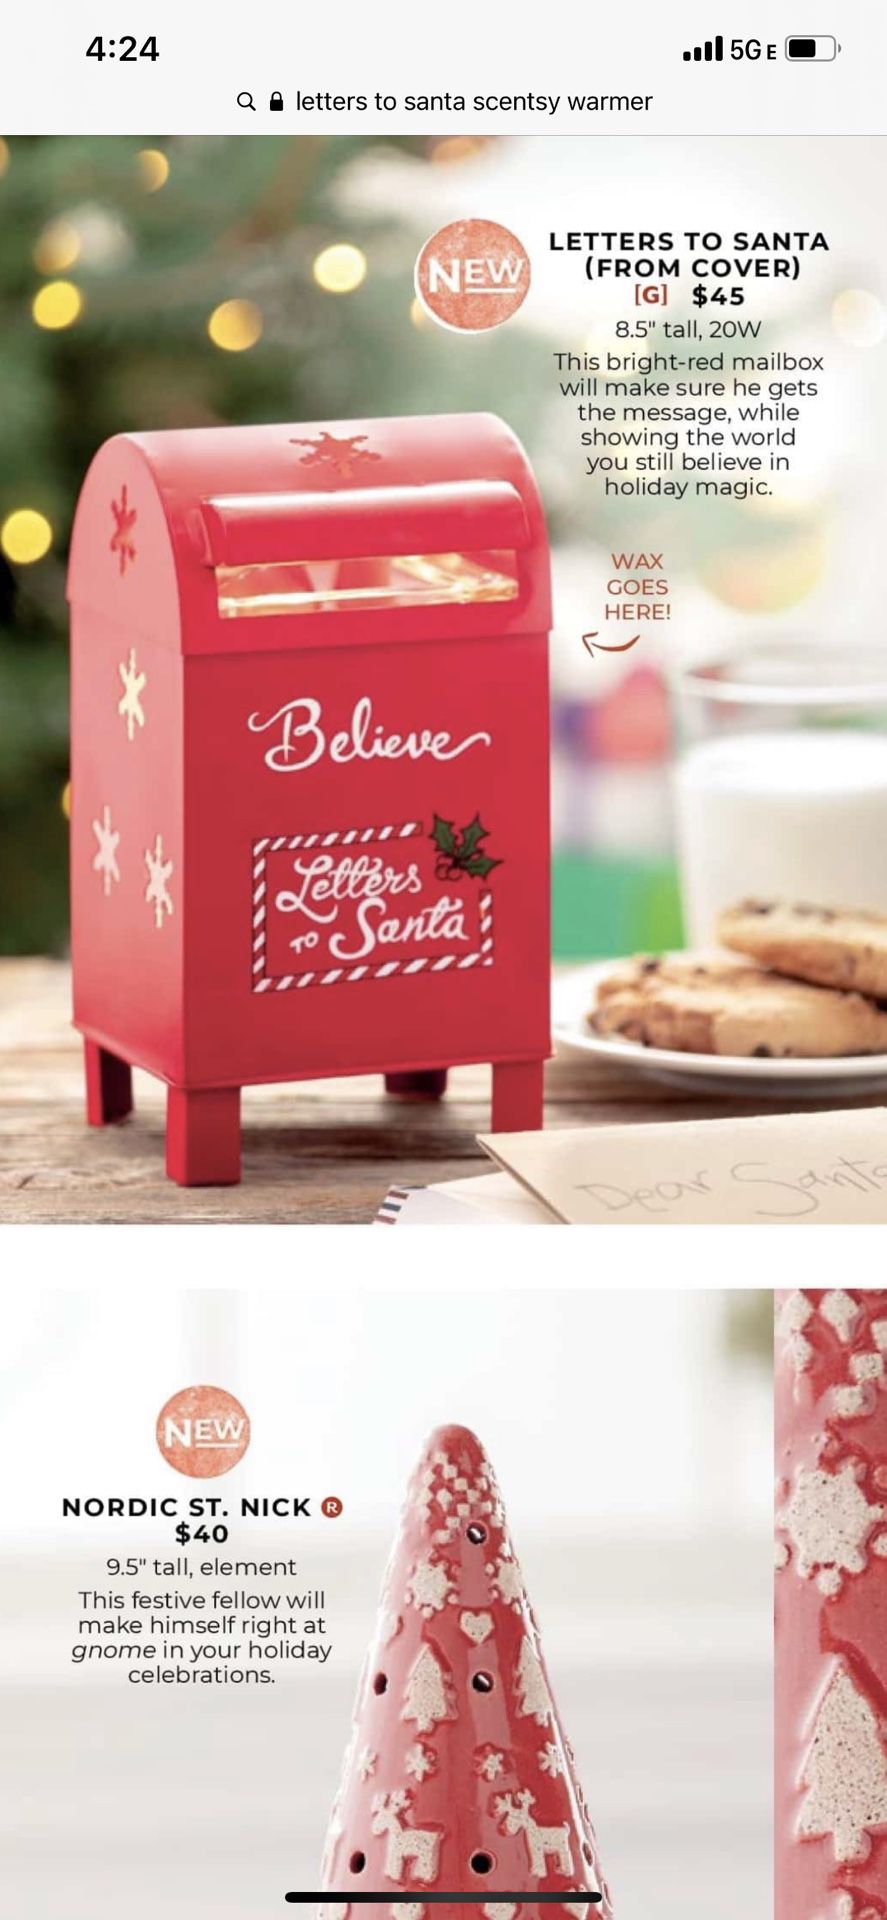 Scentsy Christmas Warmers!